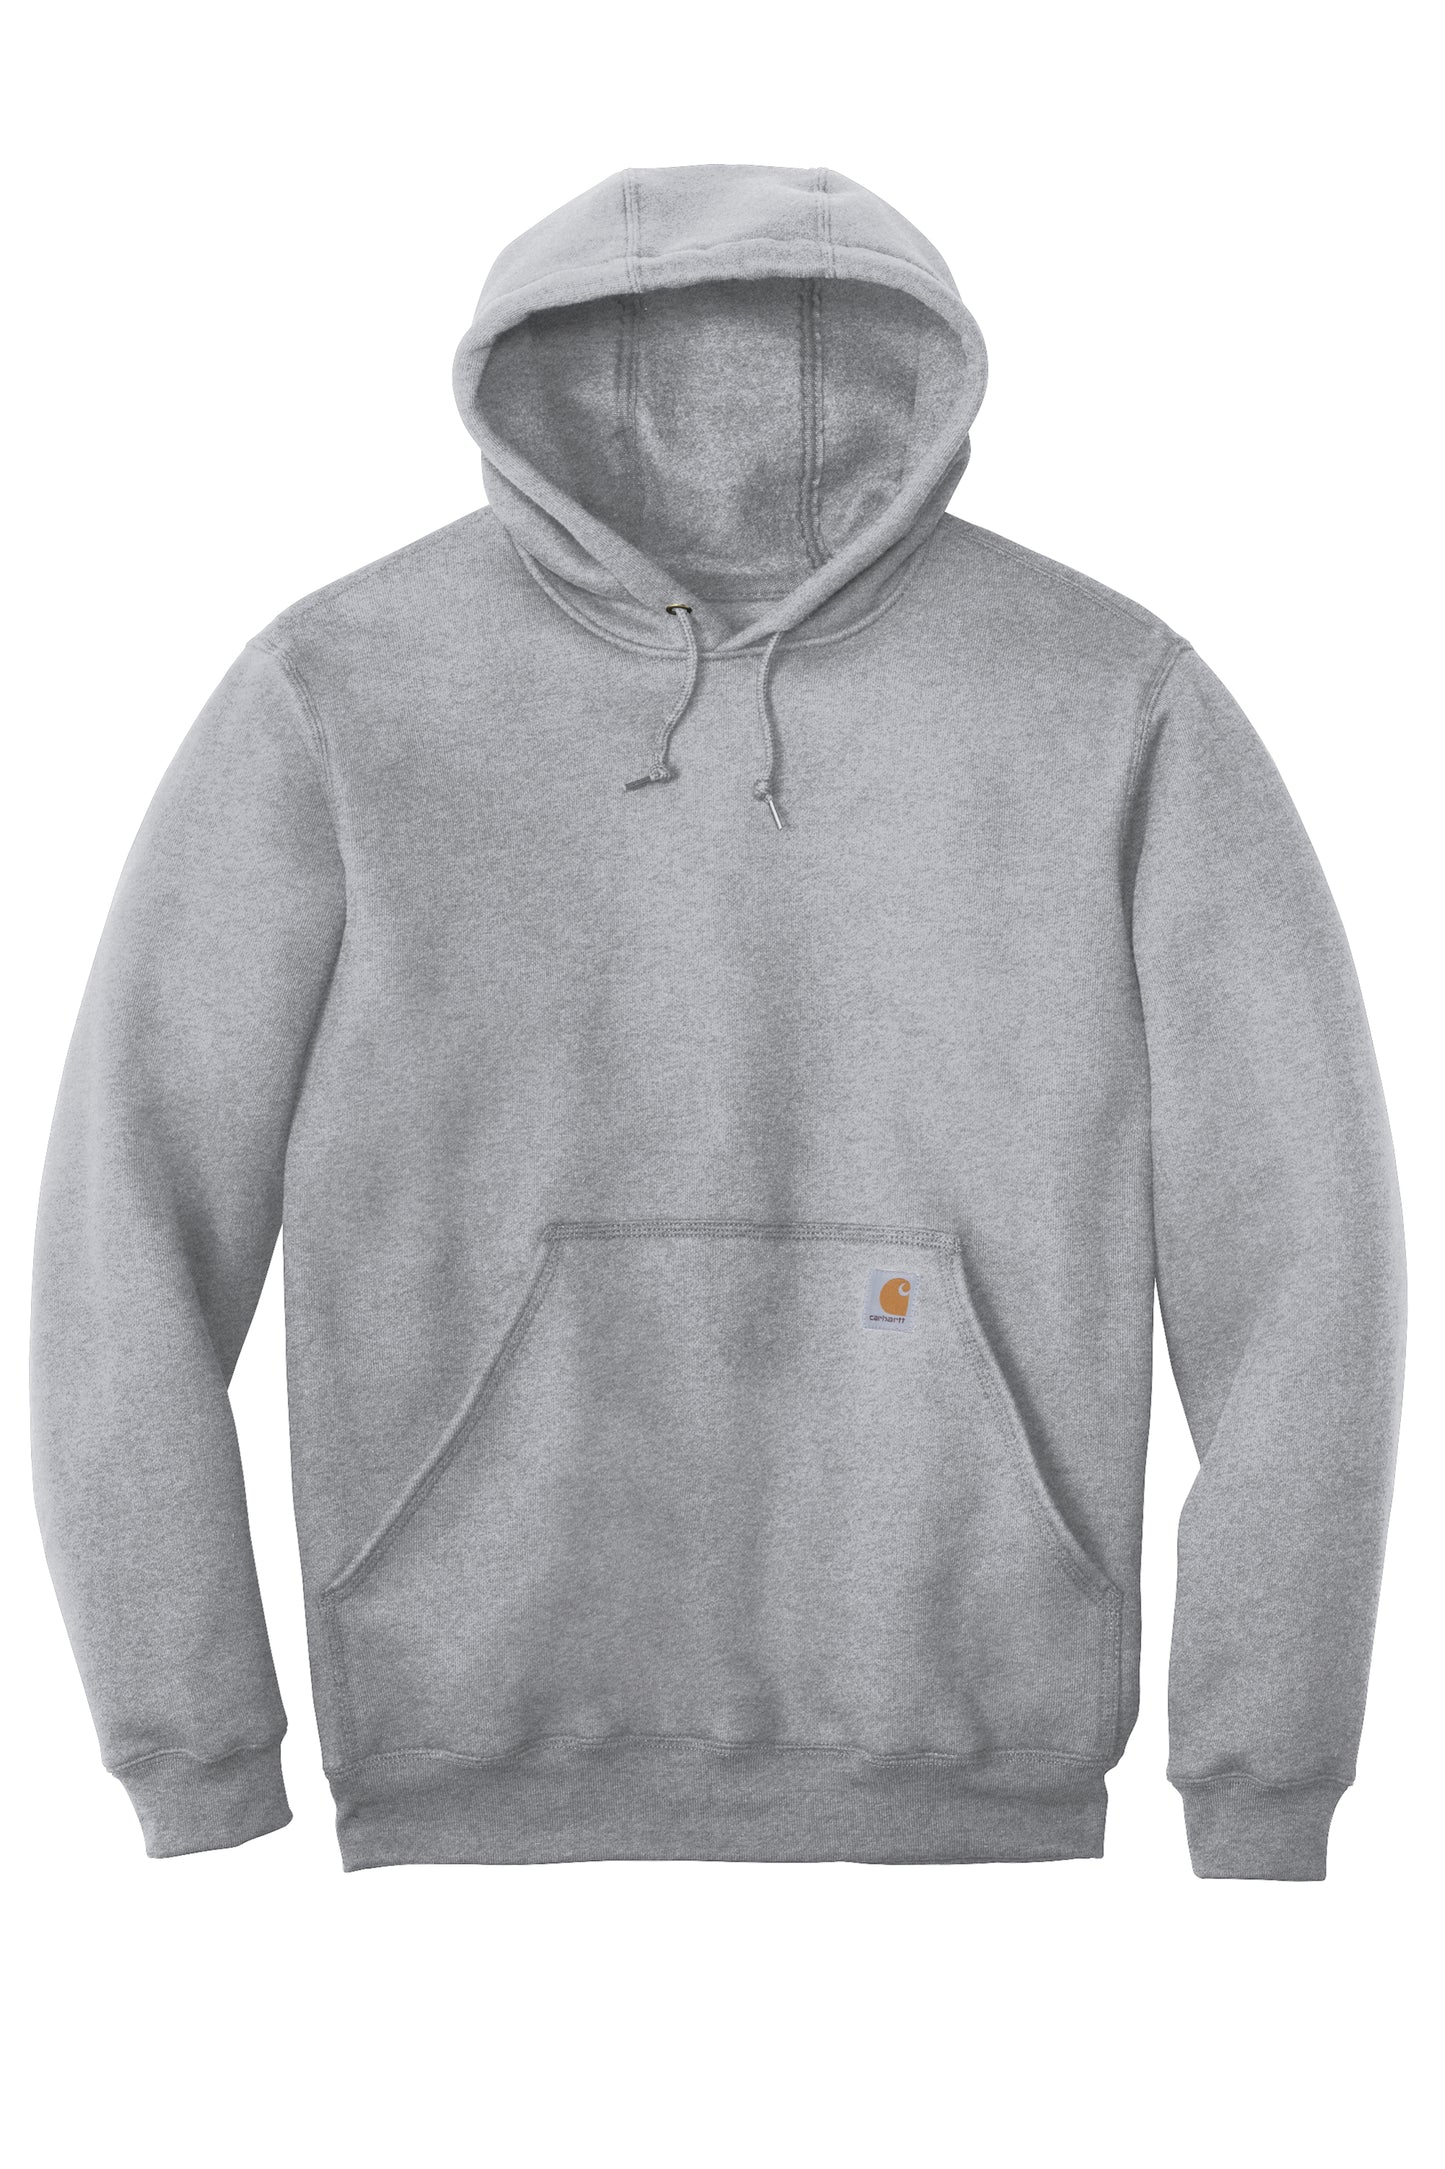 Embroidered Carhartt Hoodie